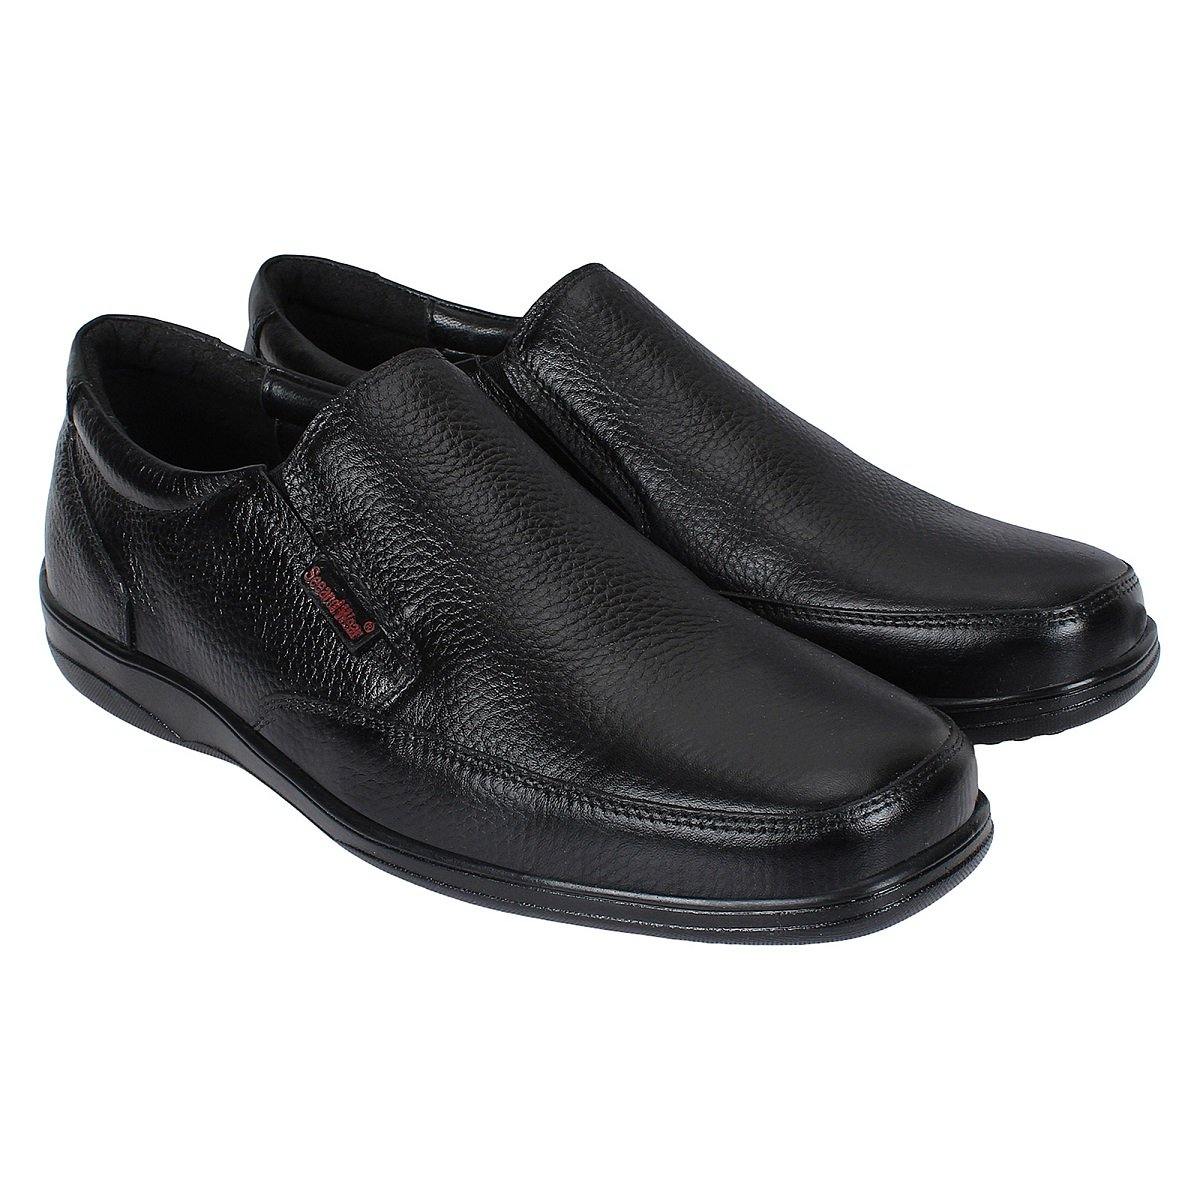 Tomboy Toes - Masculine Dress Shoes in Smaller Sizes